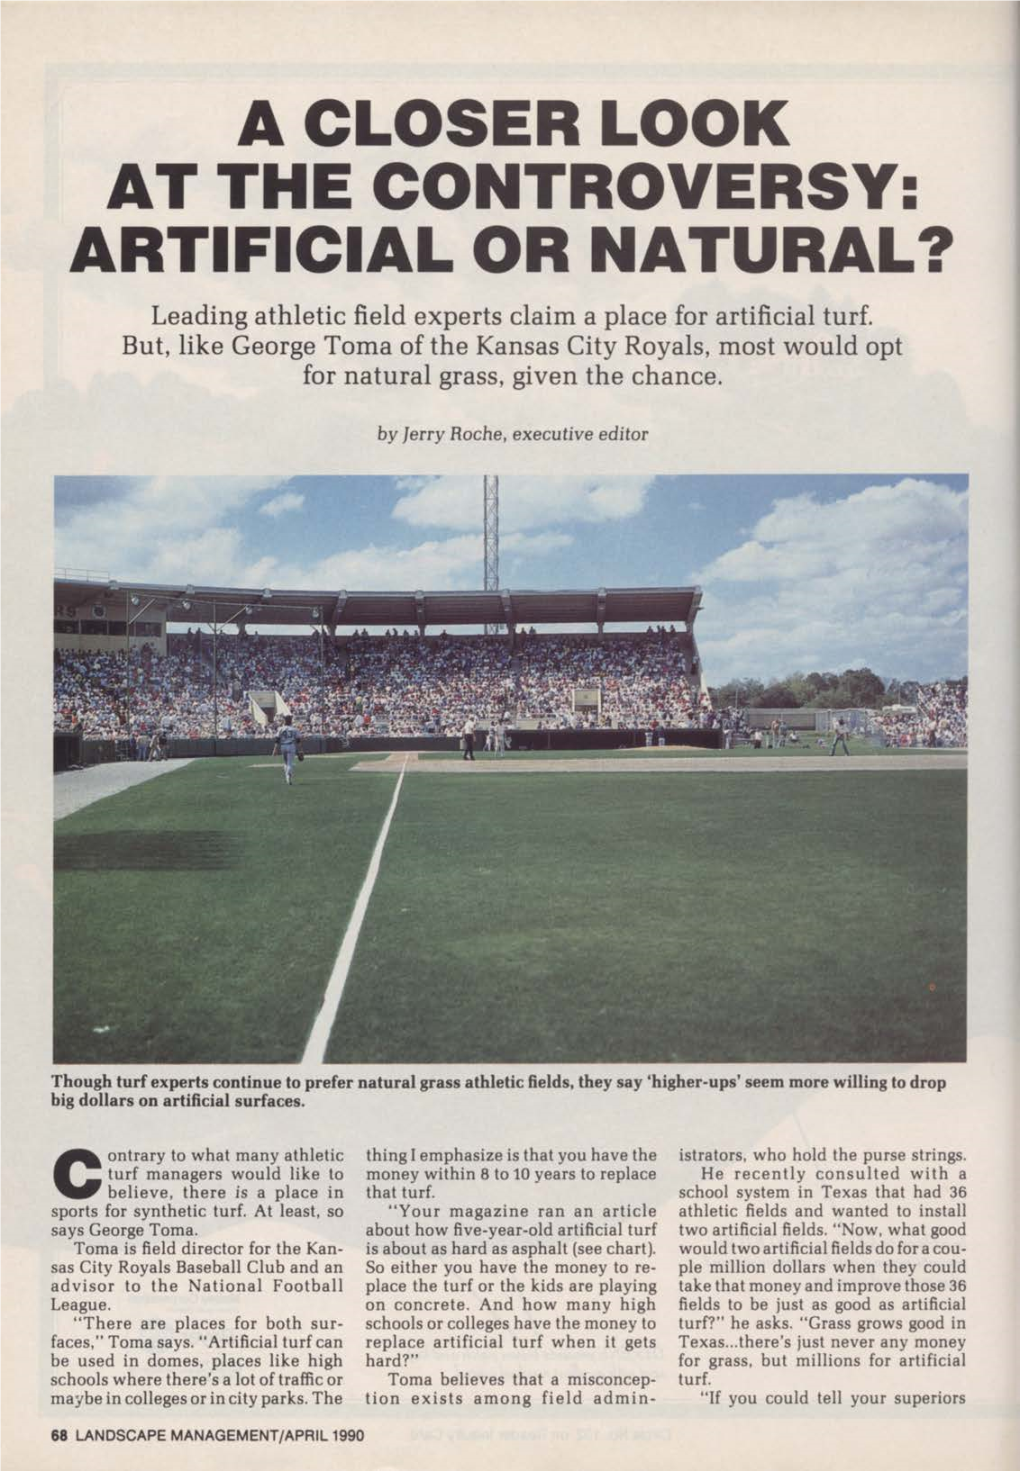 ARTIFICIAL OR NATURAL? Leading Athletic Field Experts Claim a Place for Artificial Turf